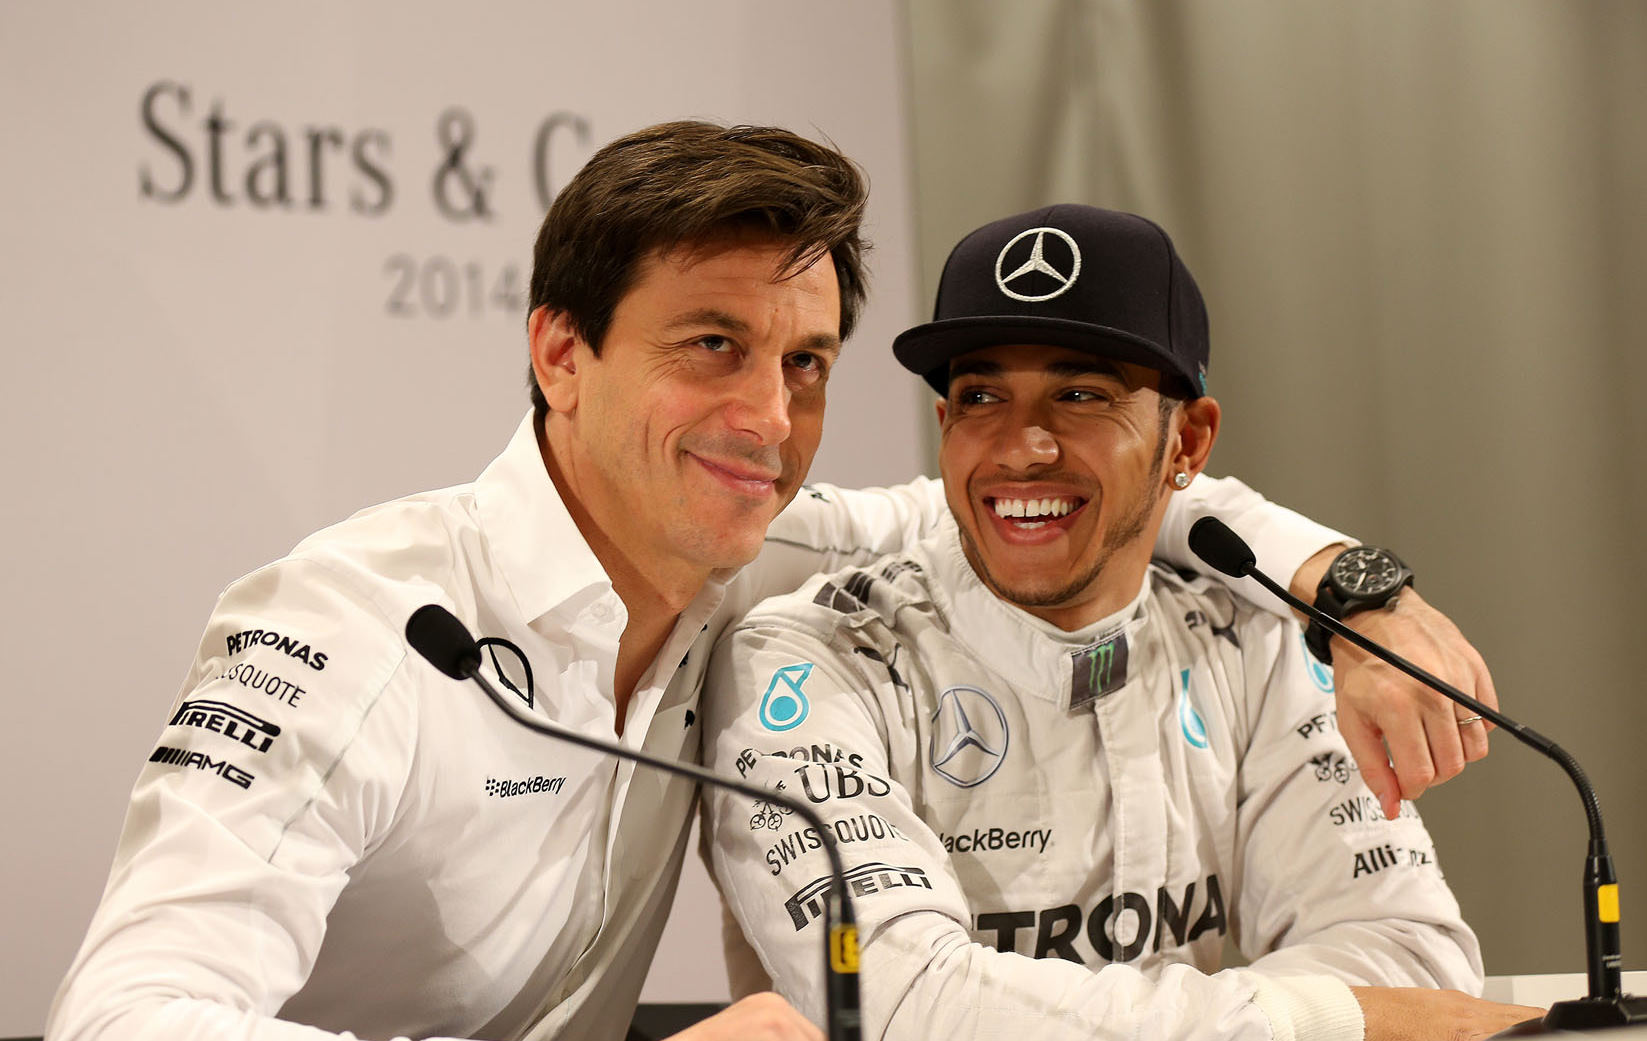 Wolff to Hamilton - You know F1 is 99% car and you the driver is only 1%, therefore, we pay you 1% of our budget